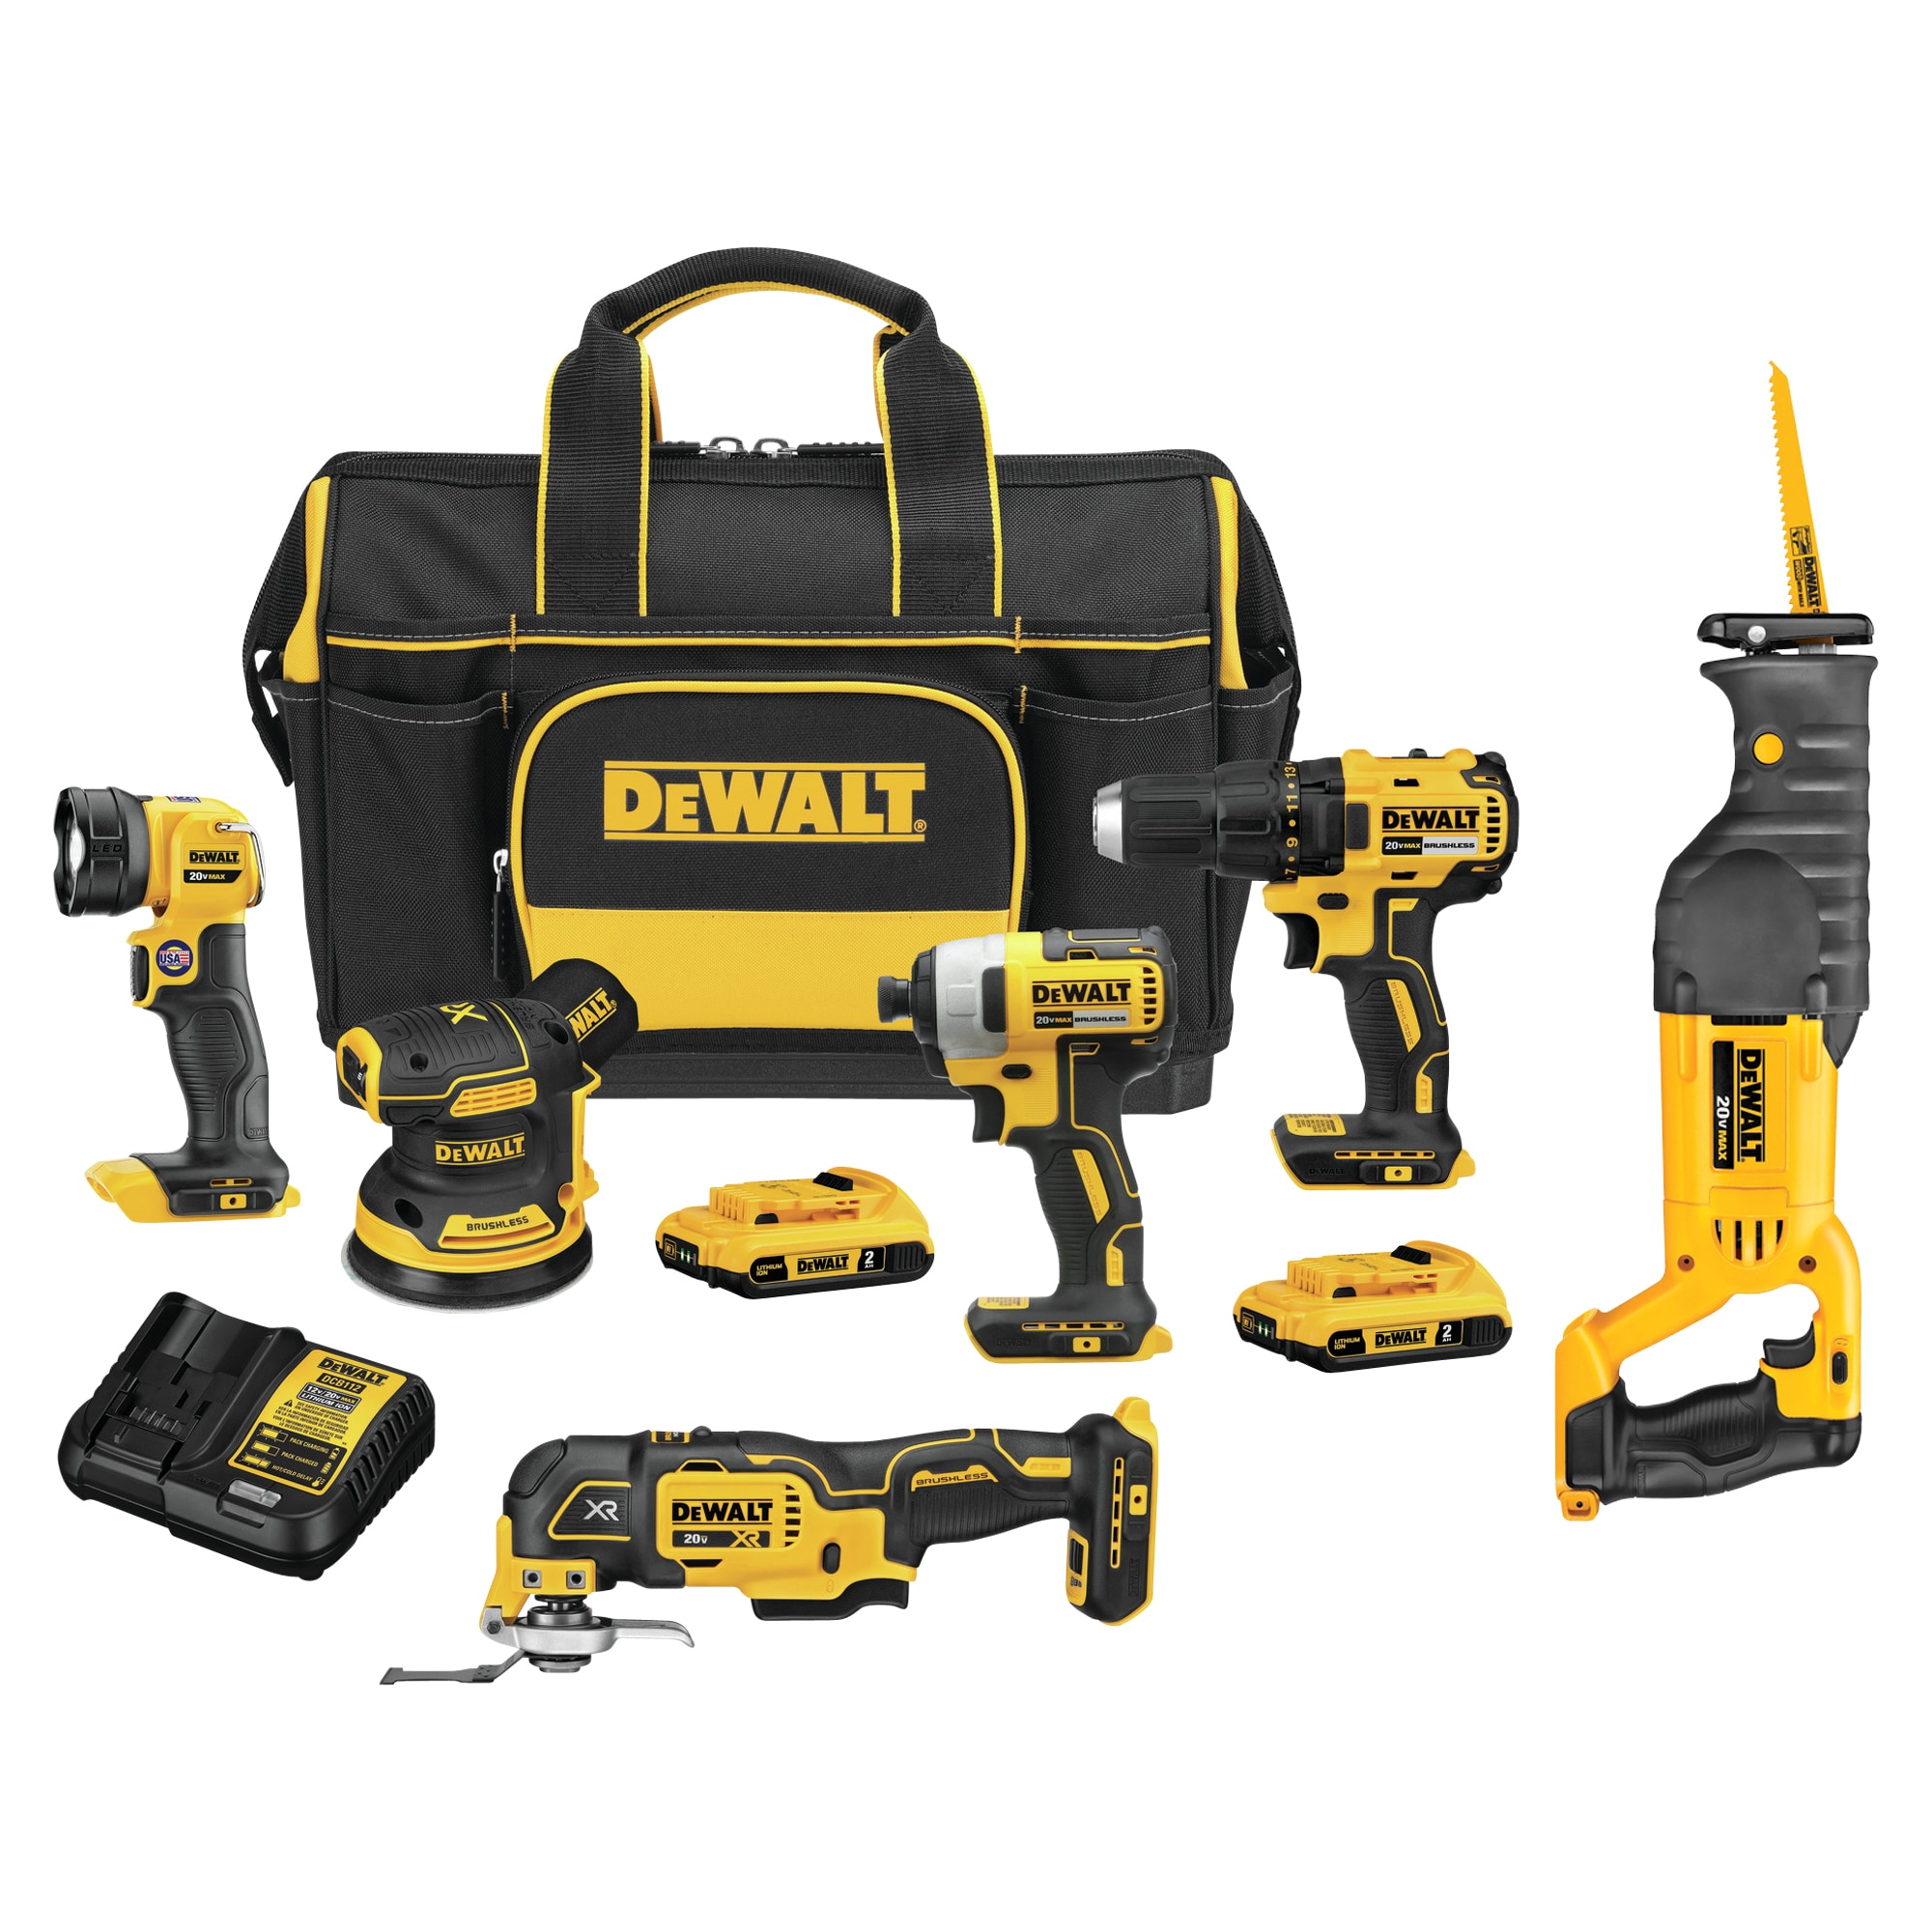 DEWALT 5-Tool 20-Volt Max Brushless Power Tool Combo Kit with Soft Case (2-Batteries and charger Included) & 20-volt Max Variable Speed Cordless